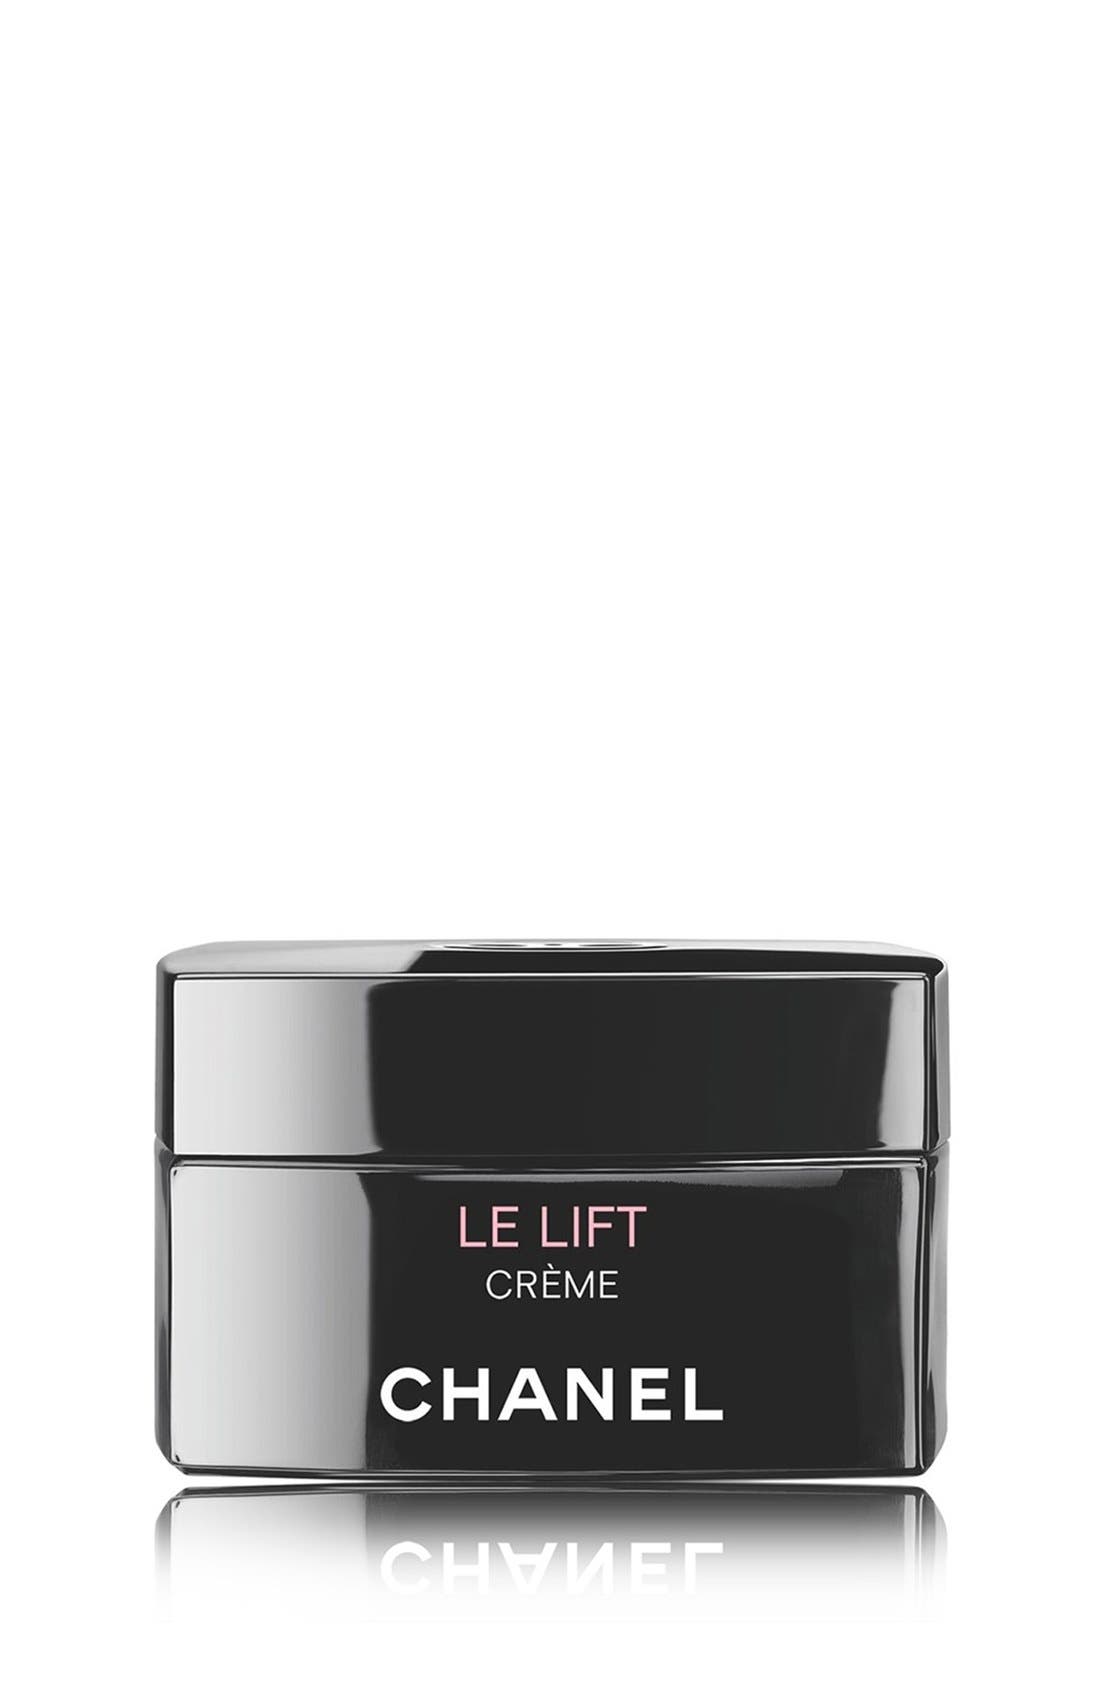 LE LIFT Smoothing and Firming Eye Cream - SPÉCIFIQUES YEUX ET LÈVRES -  CHANEL SKINCARE 